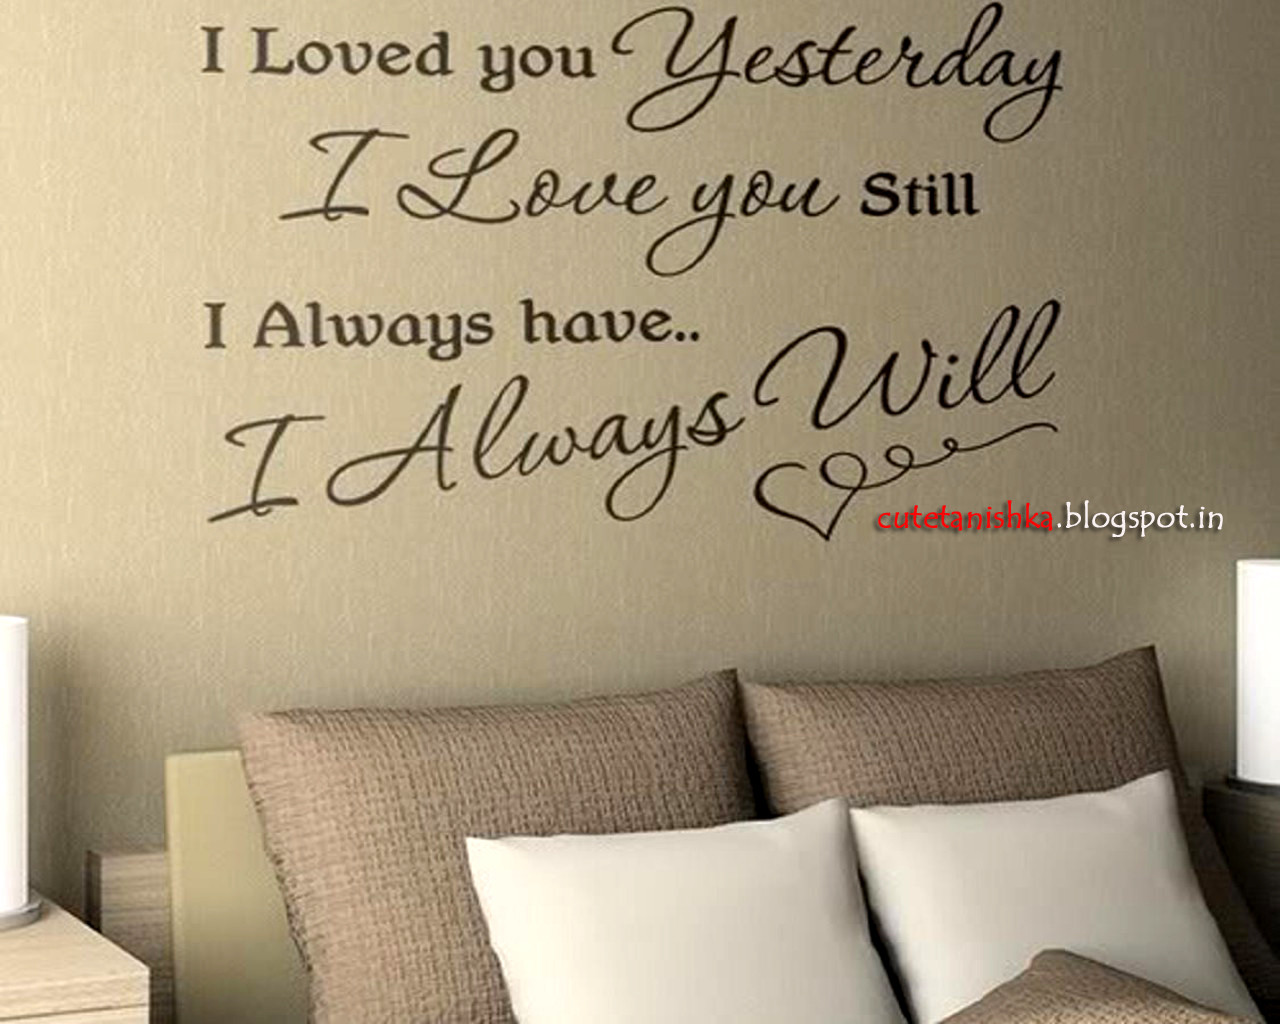 Romantic Pictures Quotes
 I Will Always Love You Romantic Quote Wallpaper For